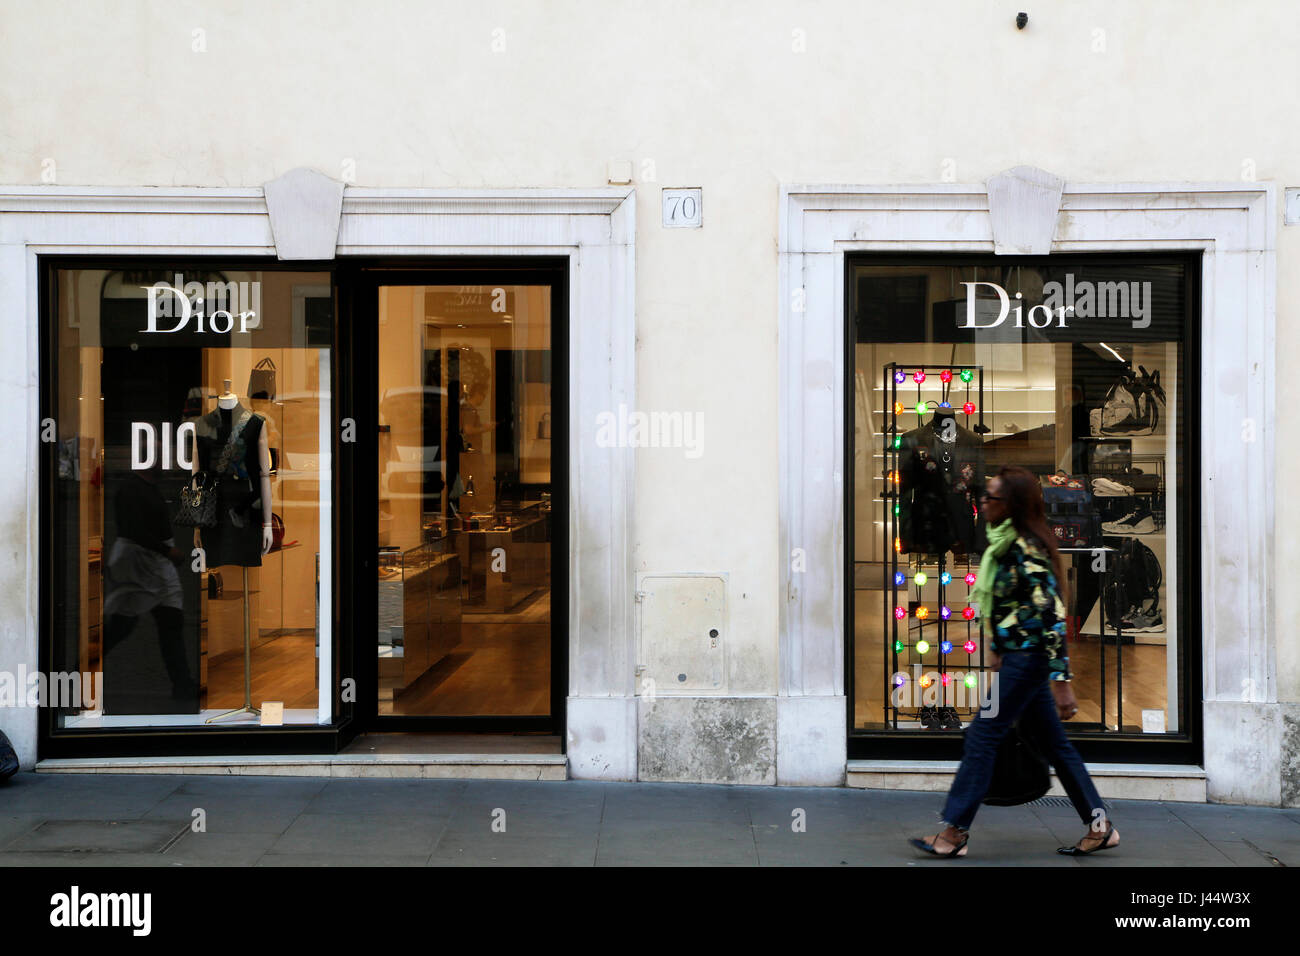 Dior Store In Florence Italy Stock Photo - Download Image Now